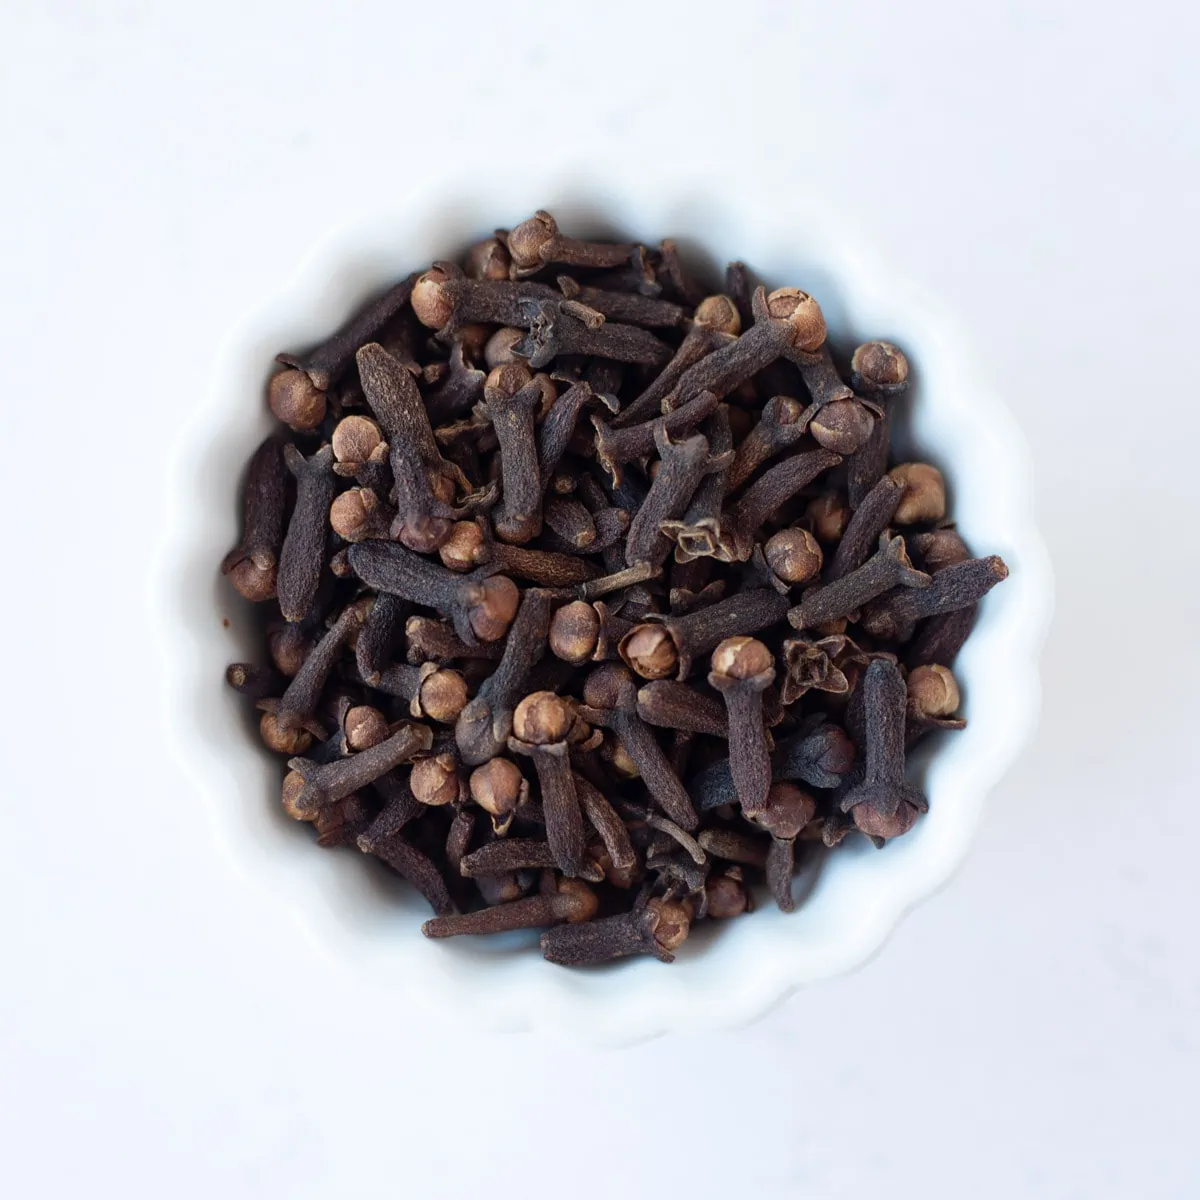 Cloves in a small white bowl.